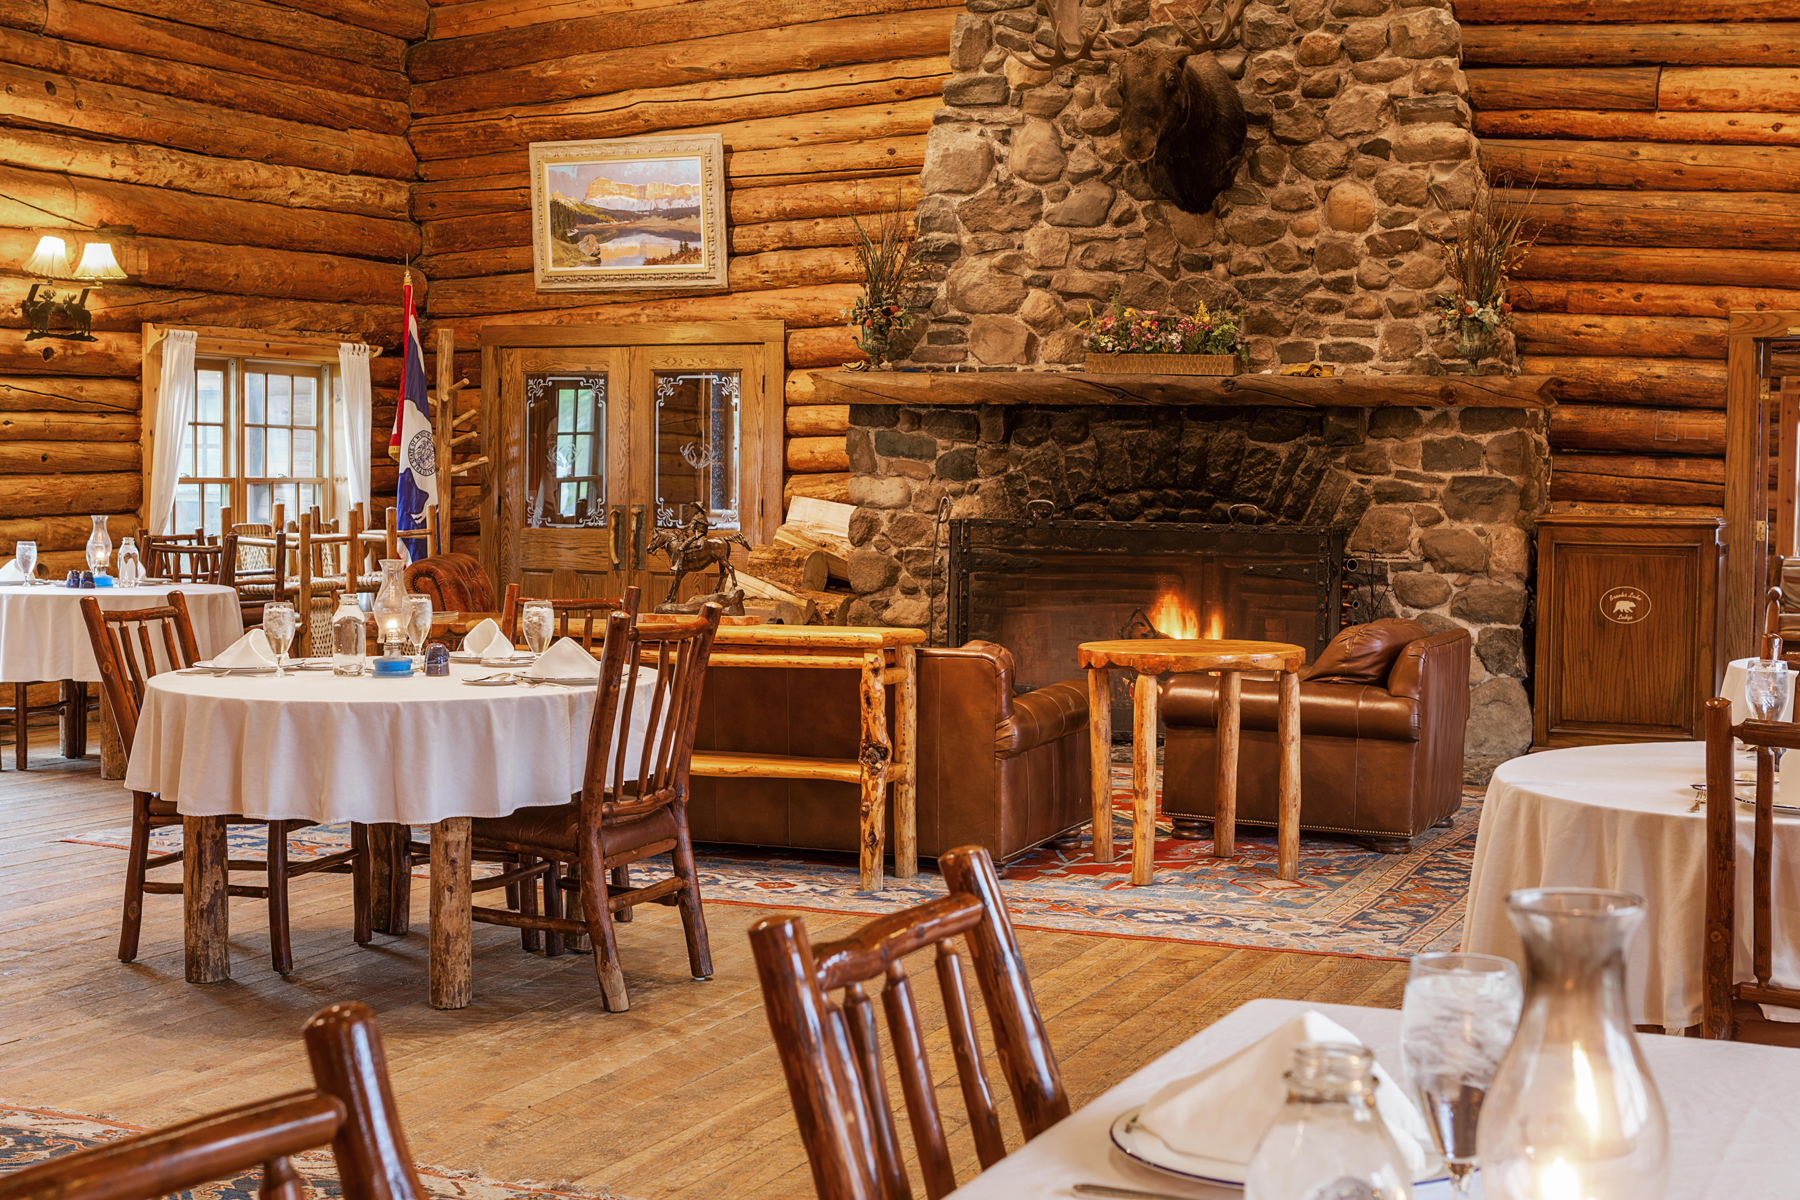 Brooks Lake Lodge & Spa has all holiday meals covered with a variety of rich and hearty home-cooked gourmet dishes for guests in its historic dining room near a crackling fire.